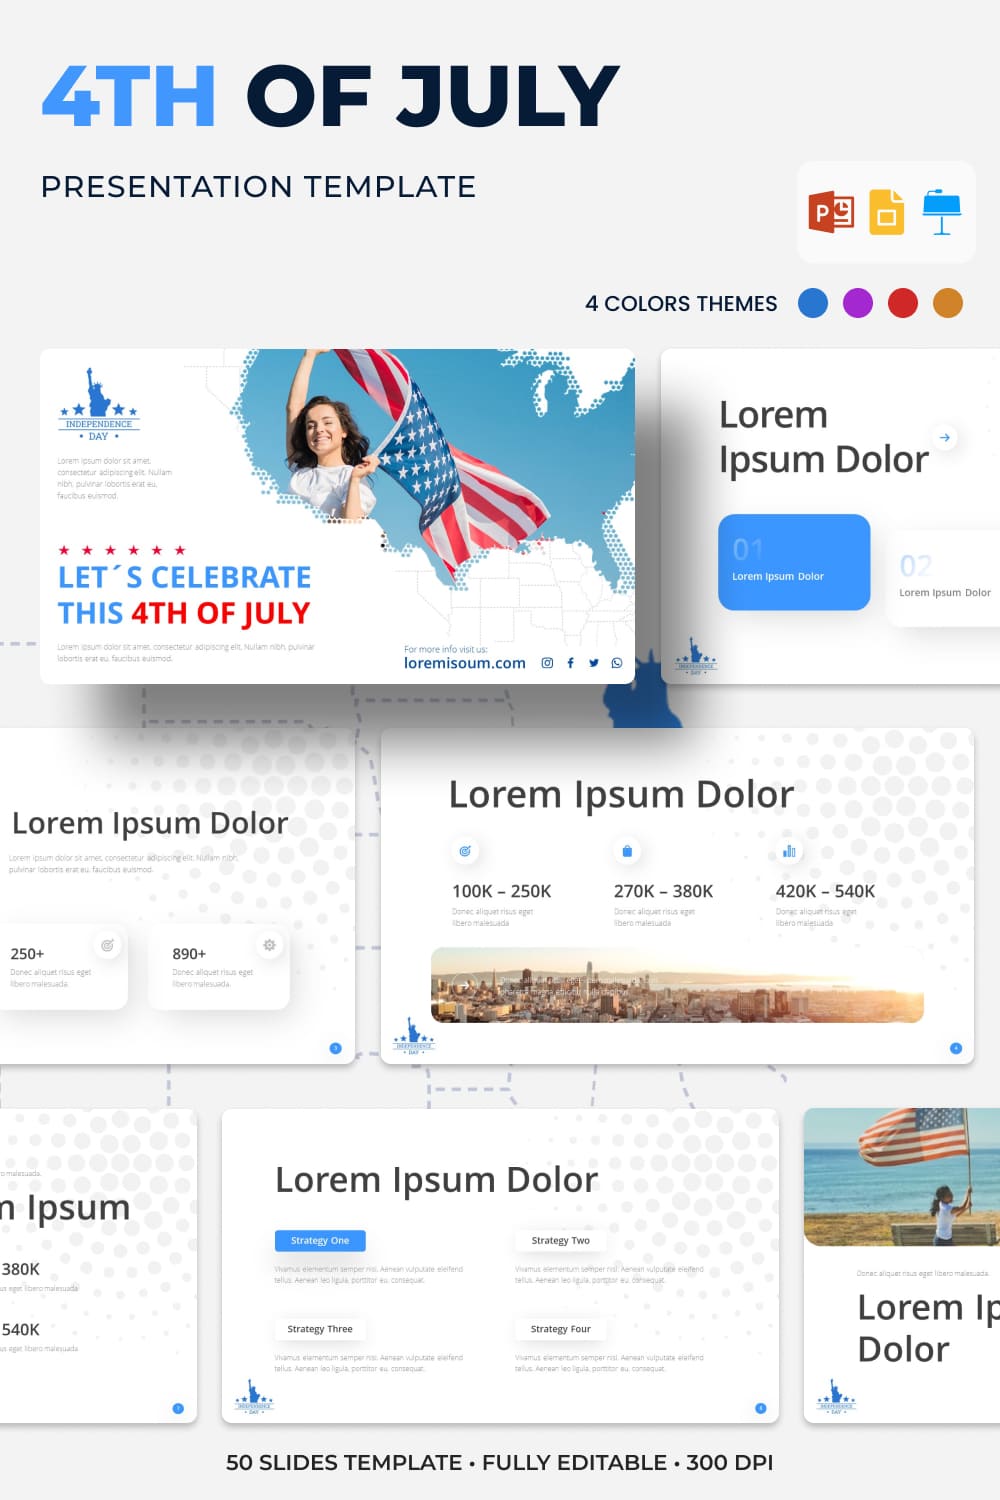 4th Of July Presentation Template - Pinterest.